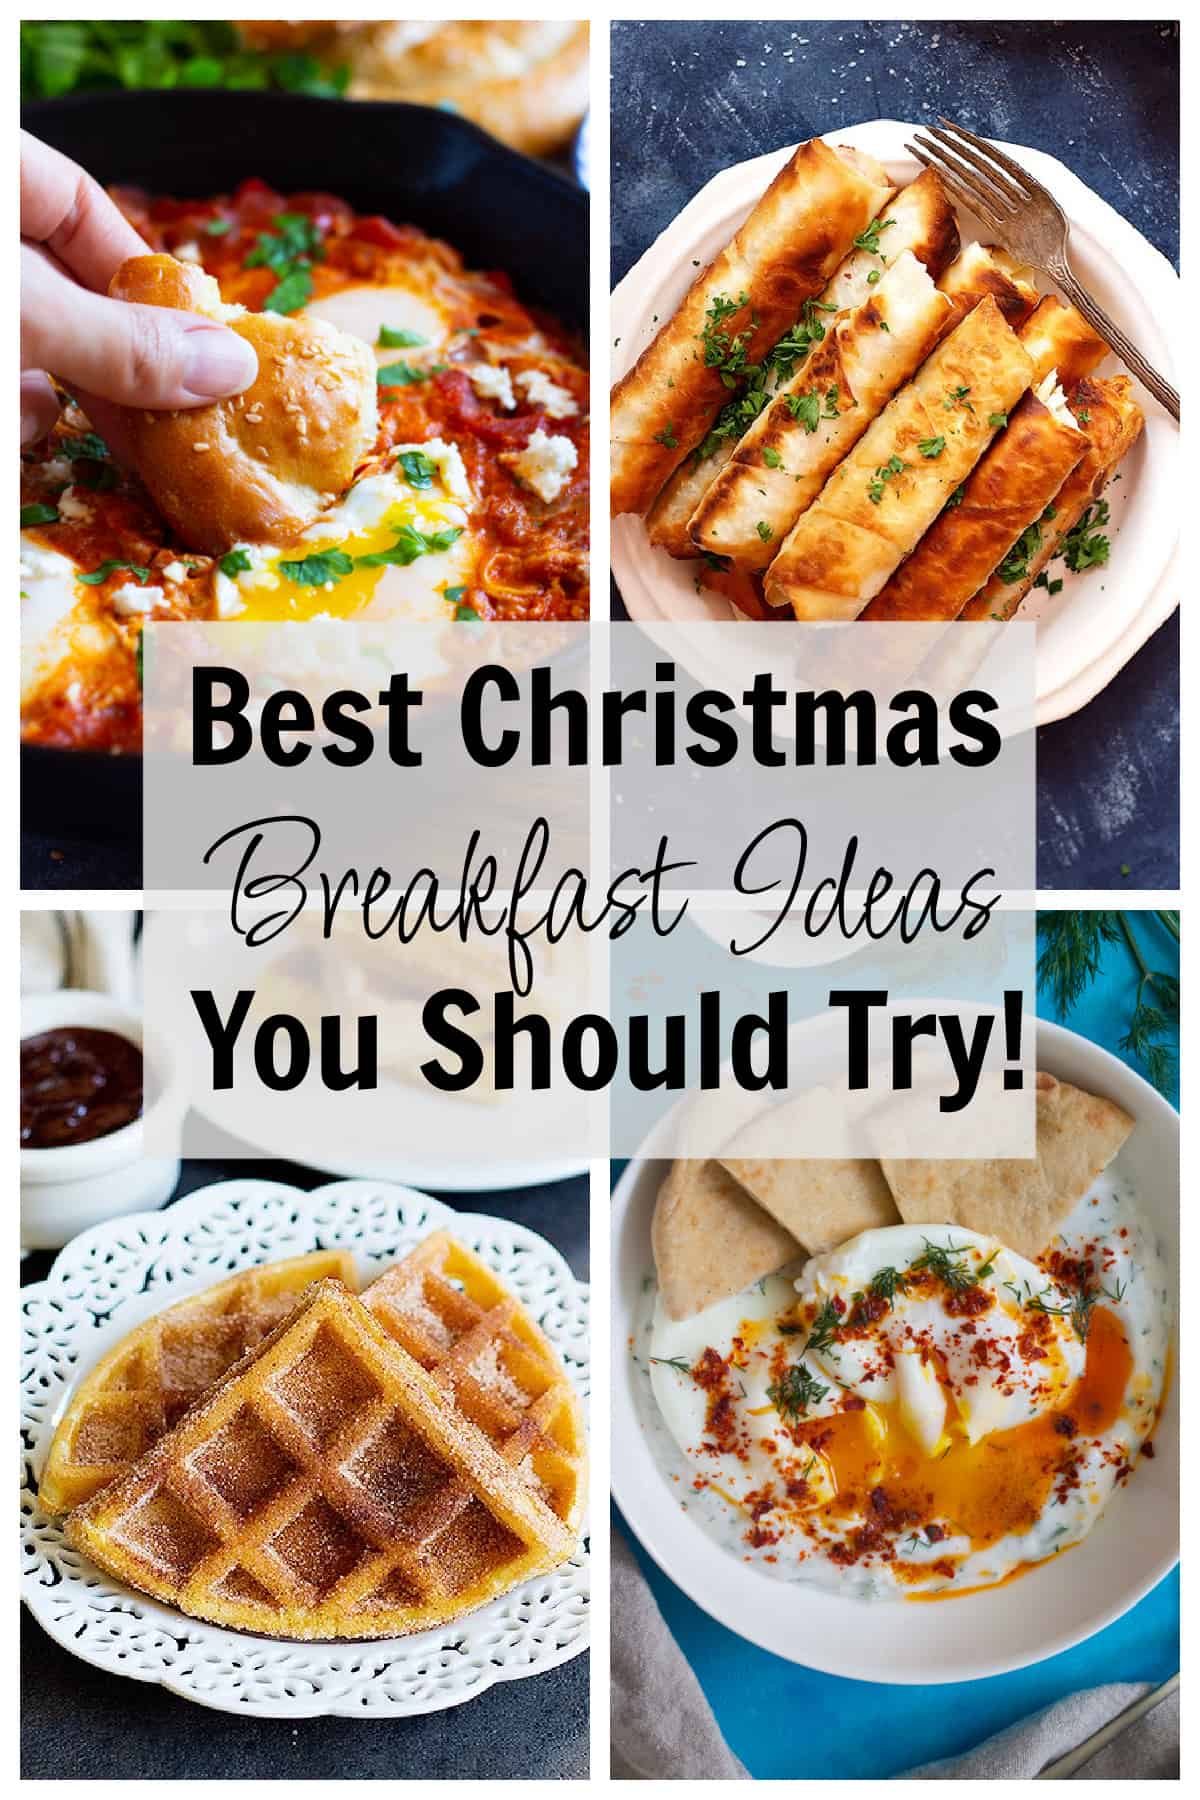 Looking for delicious Christmas breakfast ideas? We've got you covered! These holiday breakfast and brunch recipes with Mediterranean flavors are perfect for a cozy Christmas morning to enjoy with family and loved ones. You can find all kinds of sweet and savory holiday breakfast dishes to try!